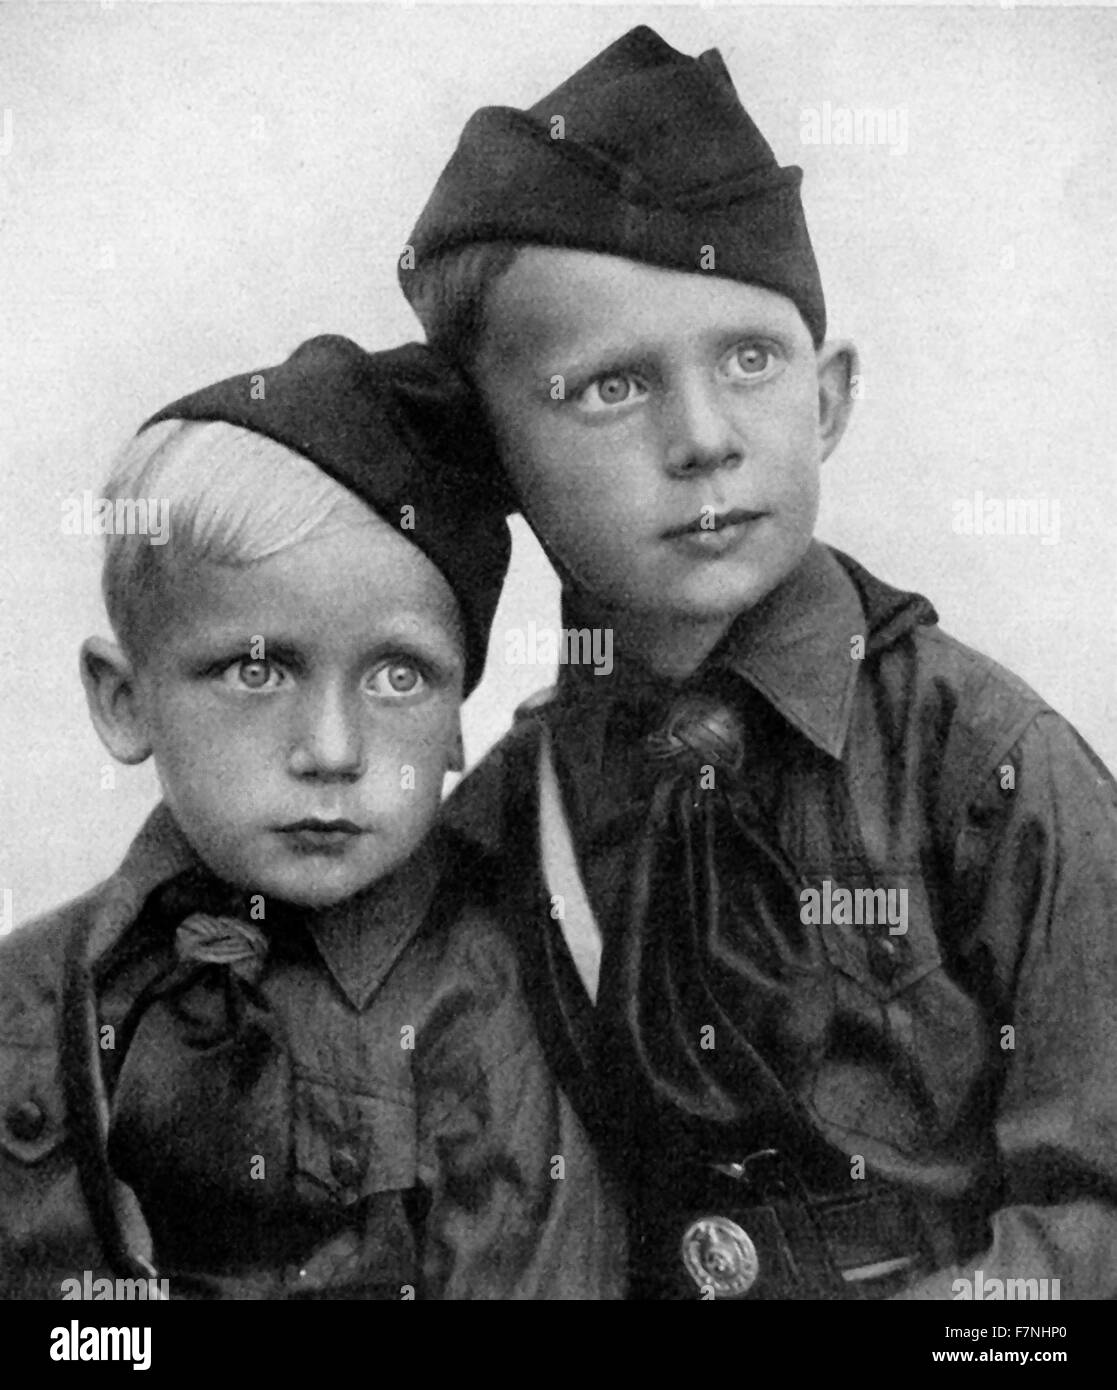 Photograph of Hitler Youth members. Dated 1939 Stock Photo